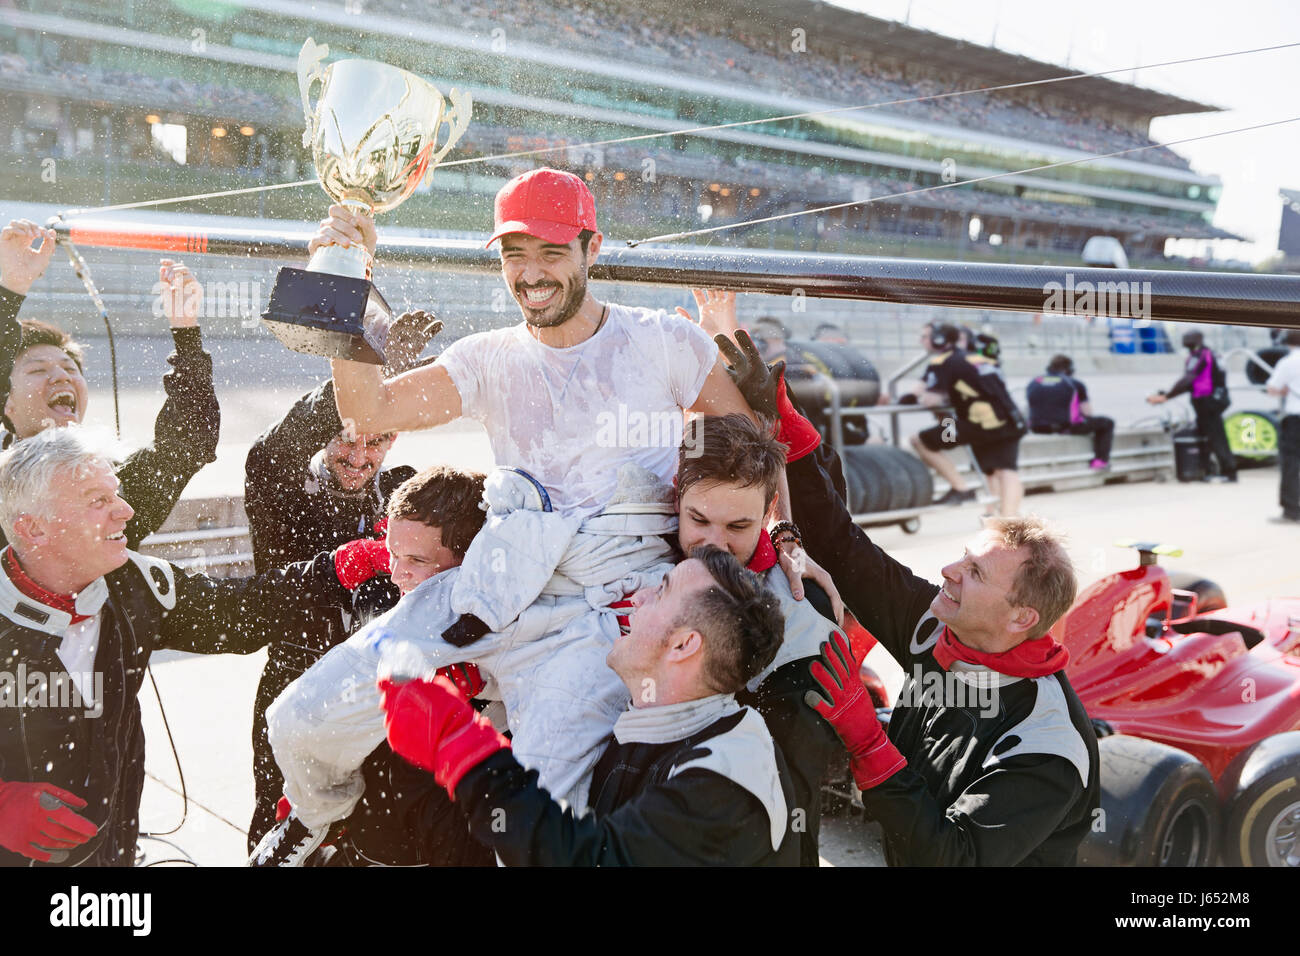 Formula one racing team carrying driver with trophy on shoulders, celebrating victory on sports track Stock Photo